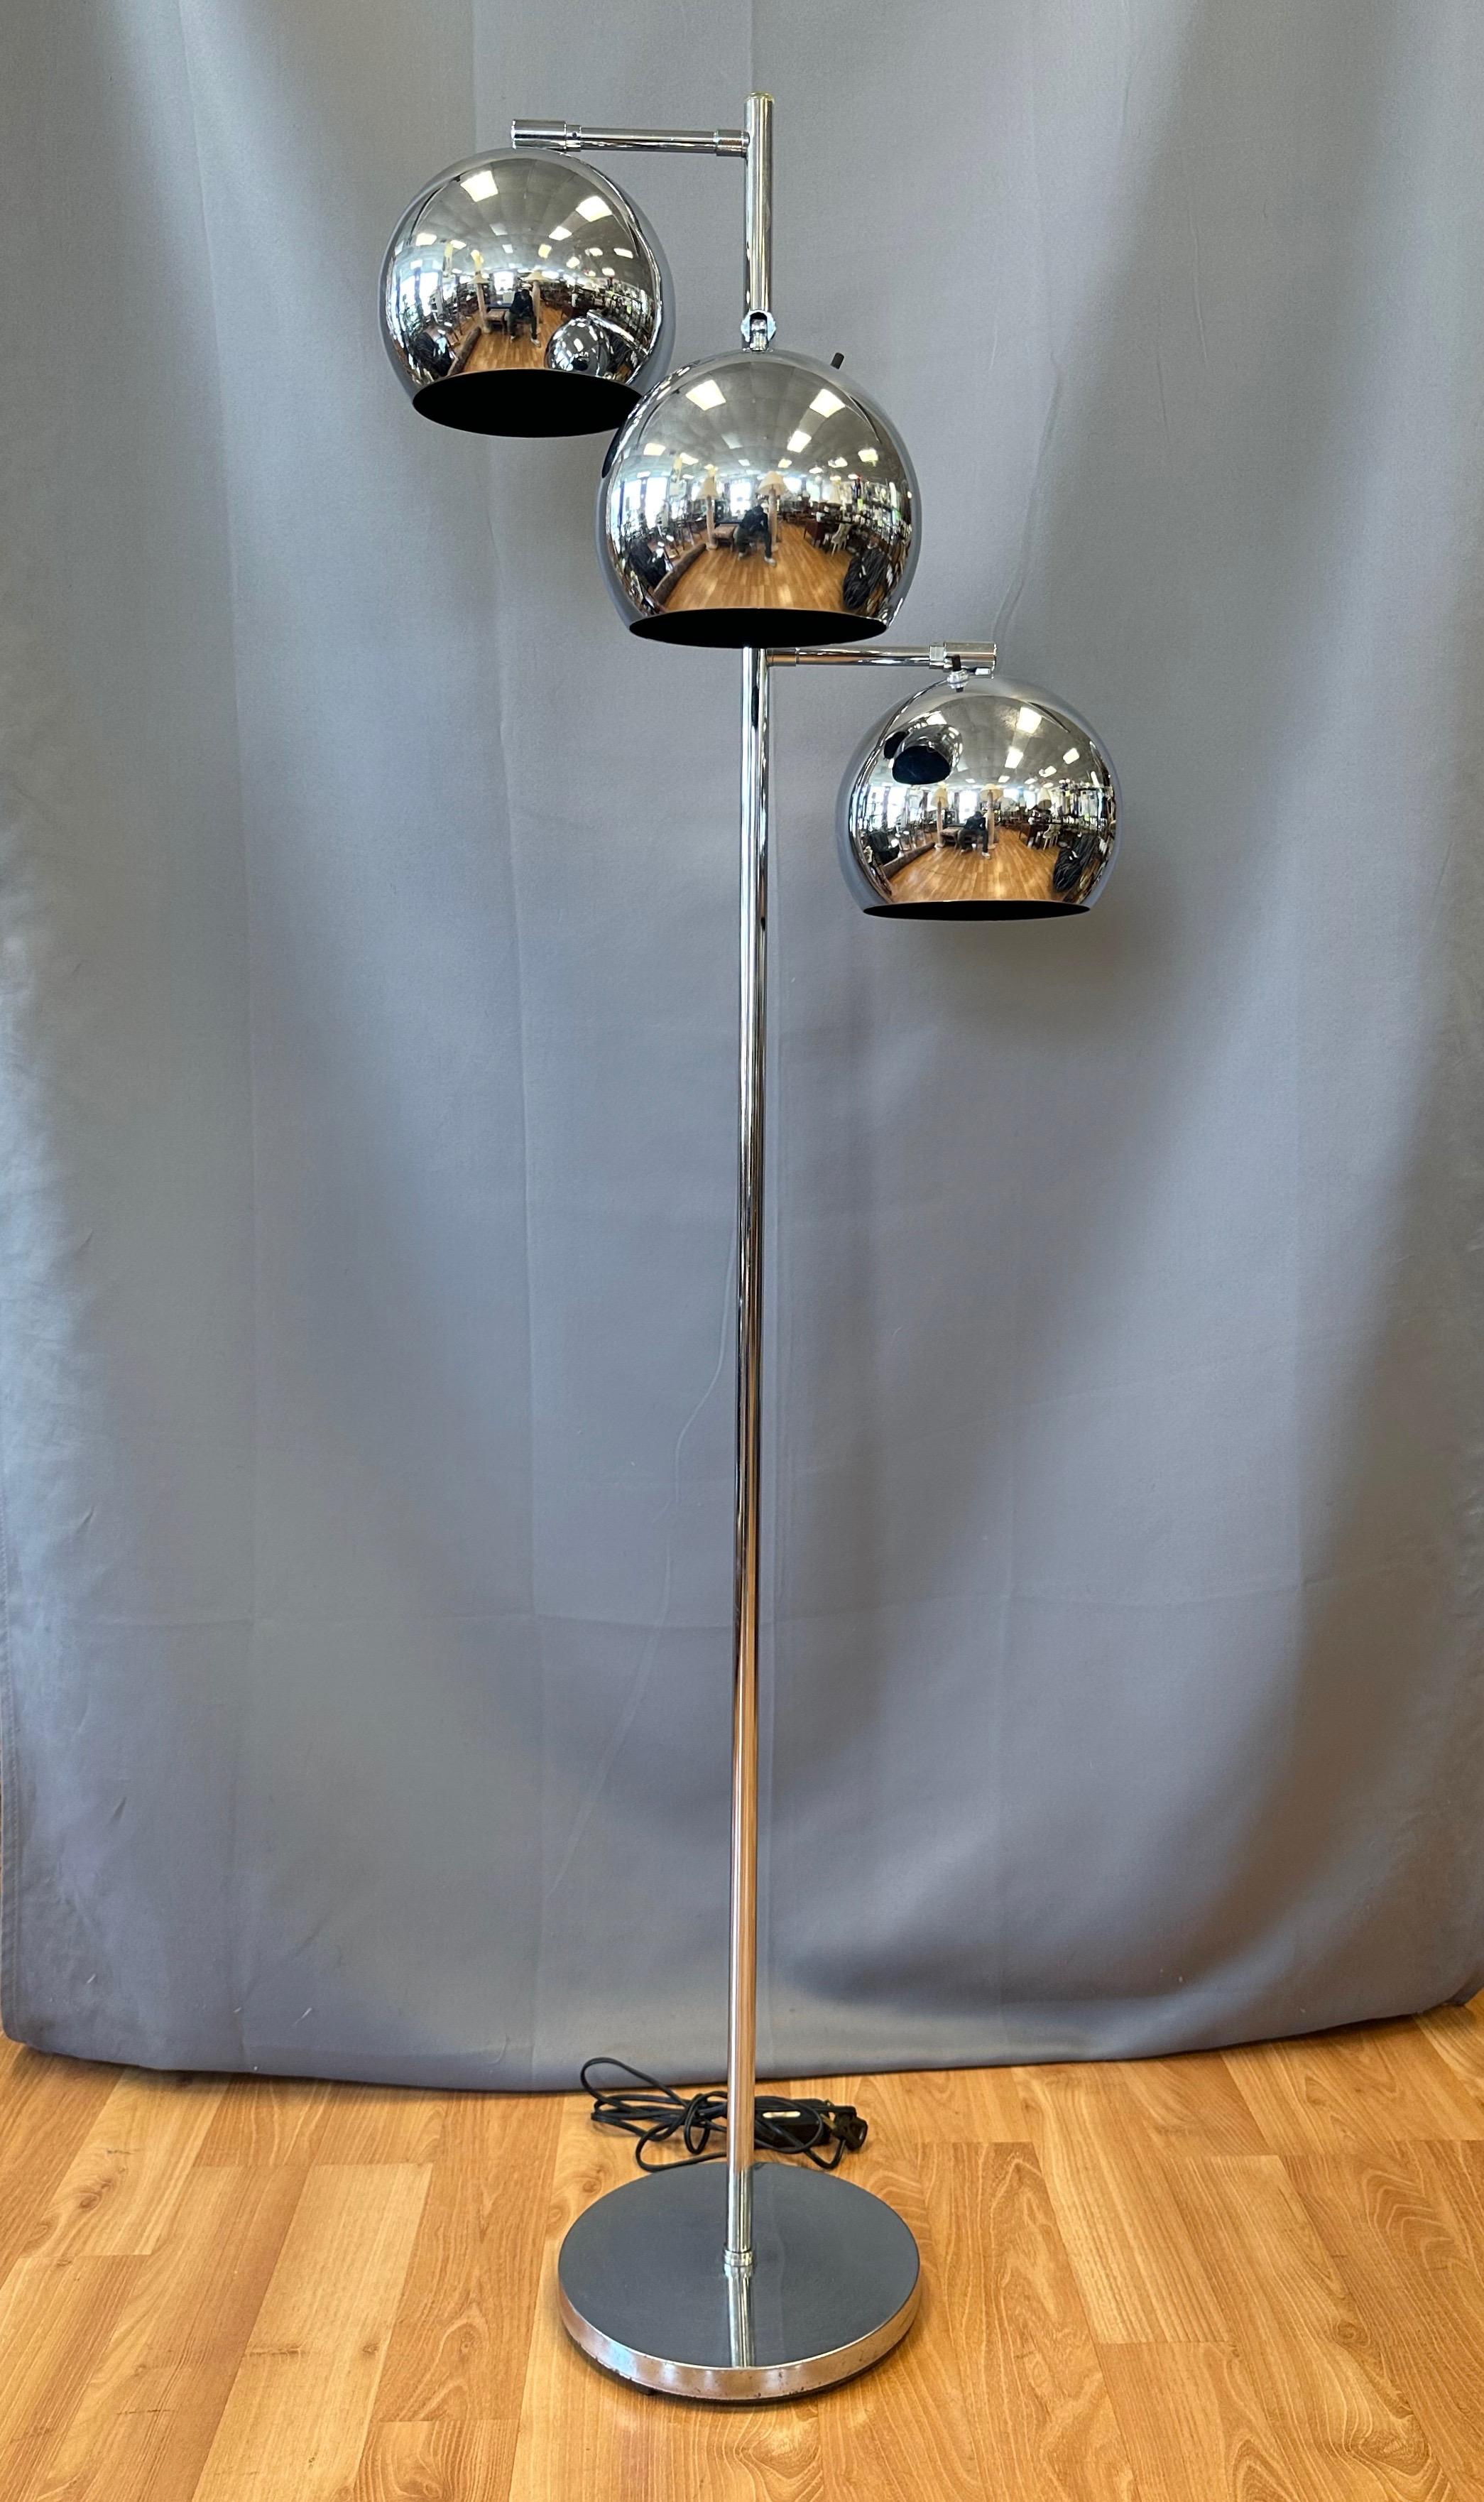 A late 1960s chrome floor lamp with a trio of articulated orb lights by OMI for Koch & Lowy.

Finished in gleaming chrome from top to bottom. Eyeball-style globe shades with matte black interiors rotate and swivel on fixed arms that branch out in